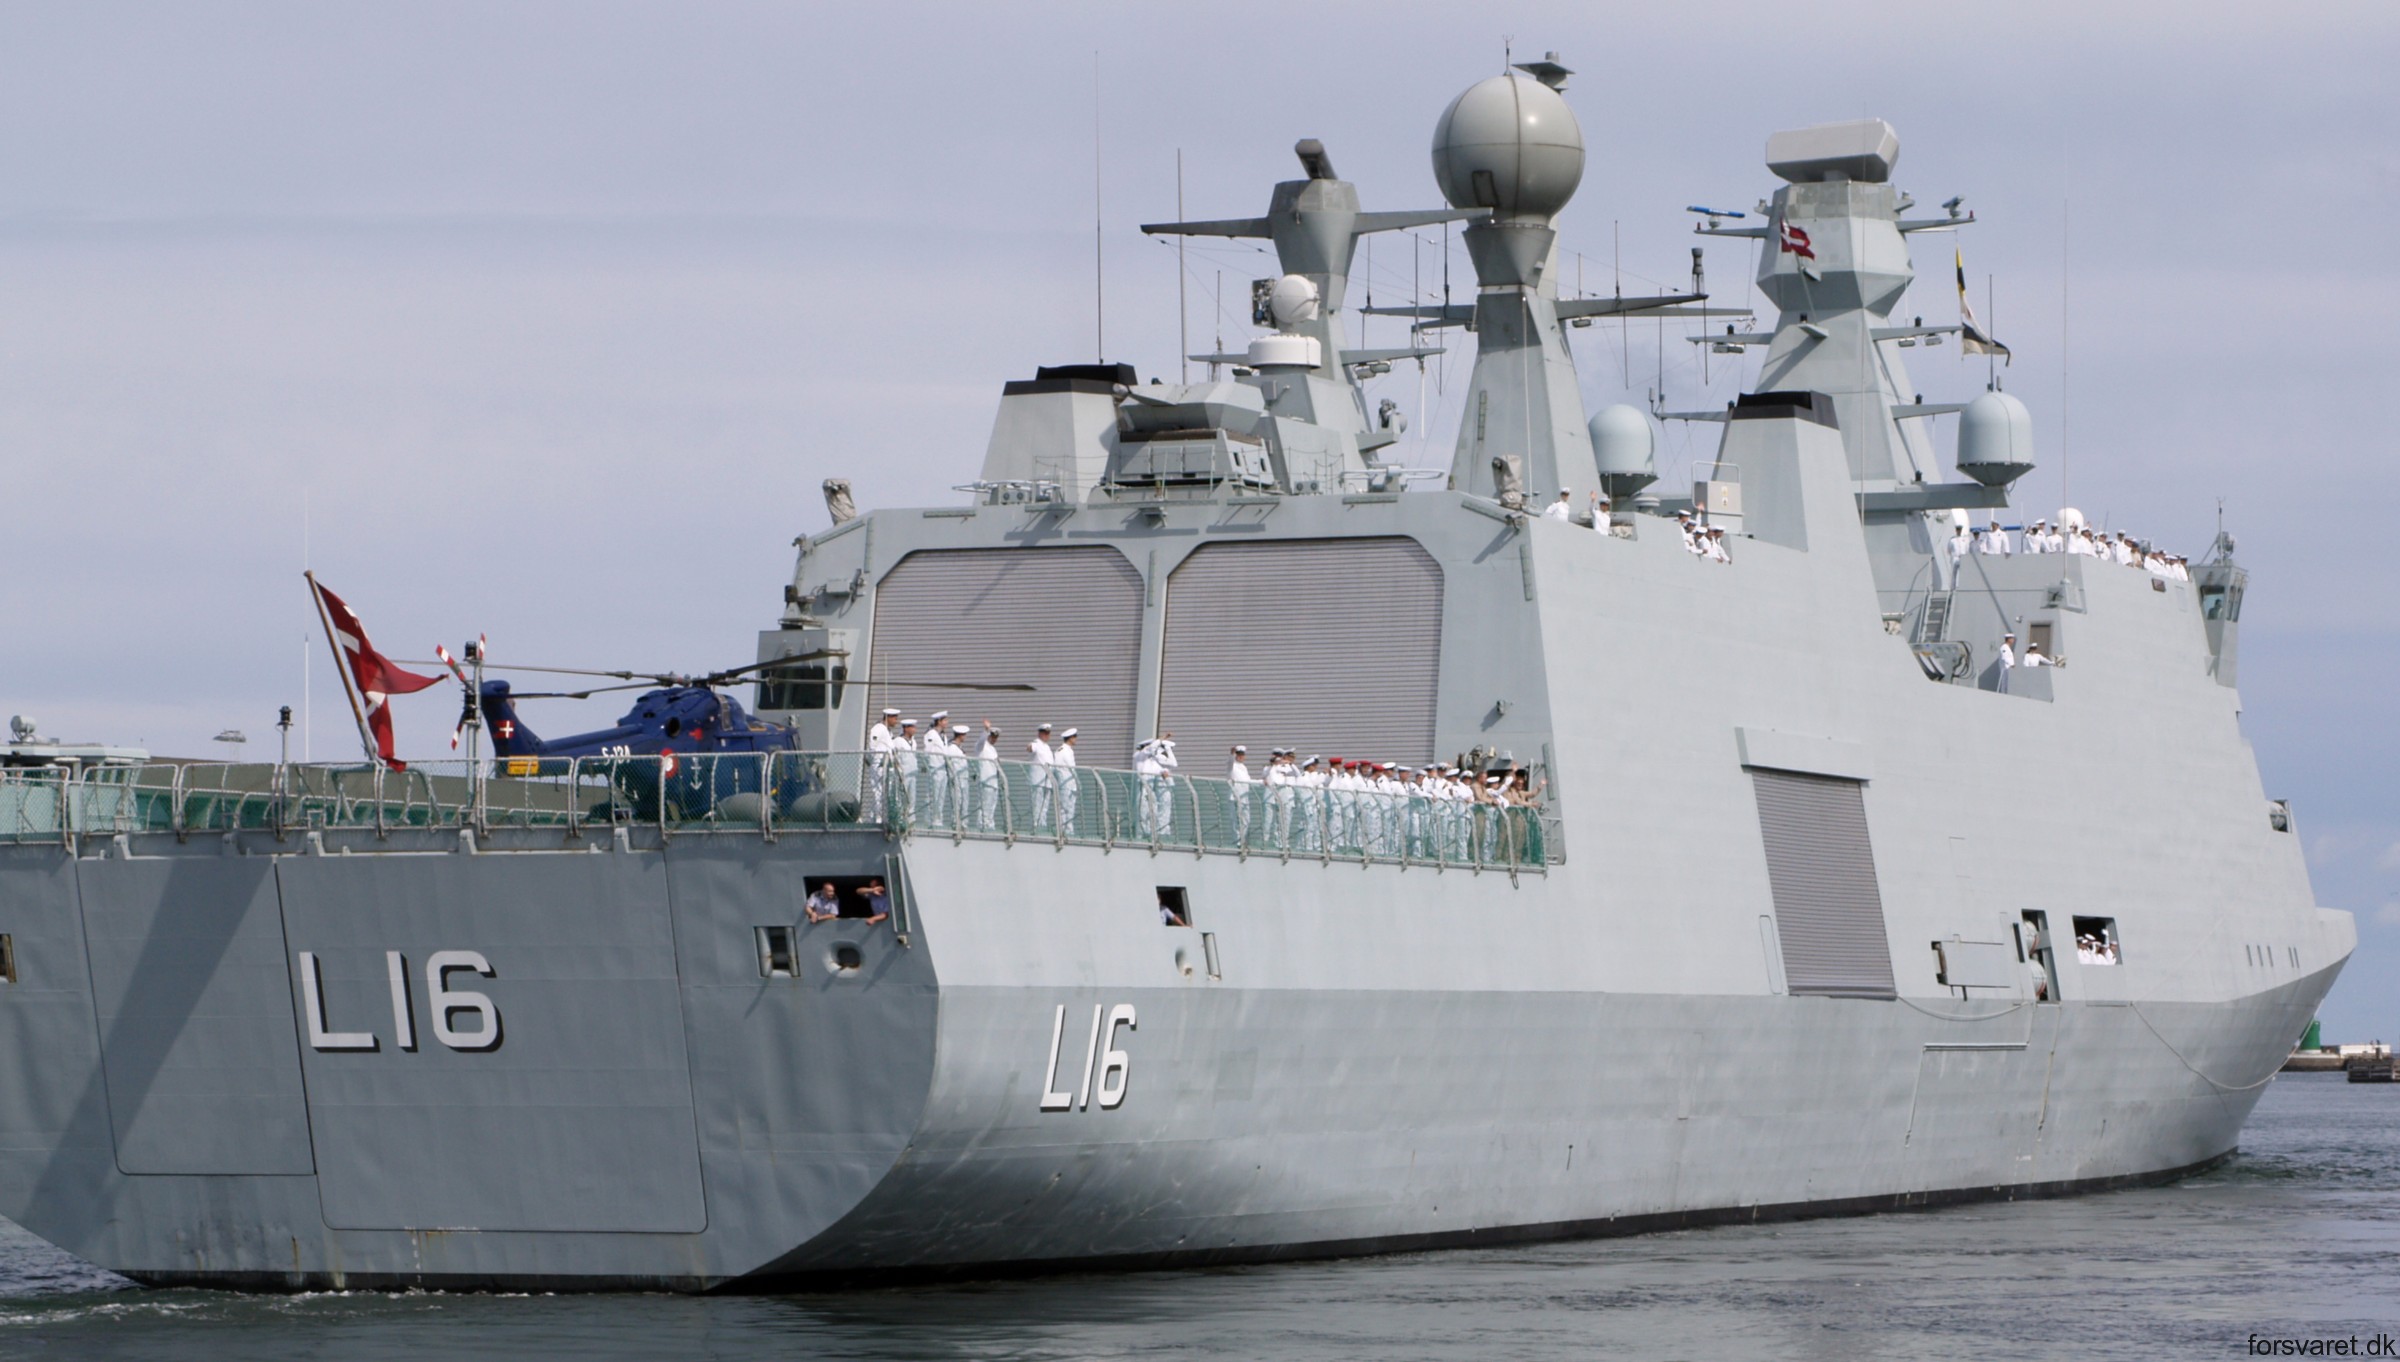 l-16 hdms absalon command support ship frigate royal danish navy 18